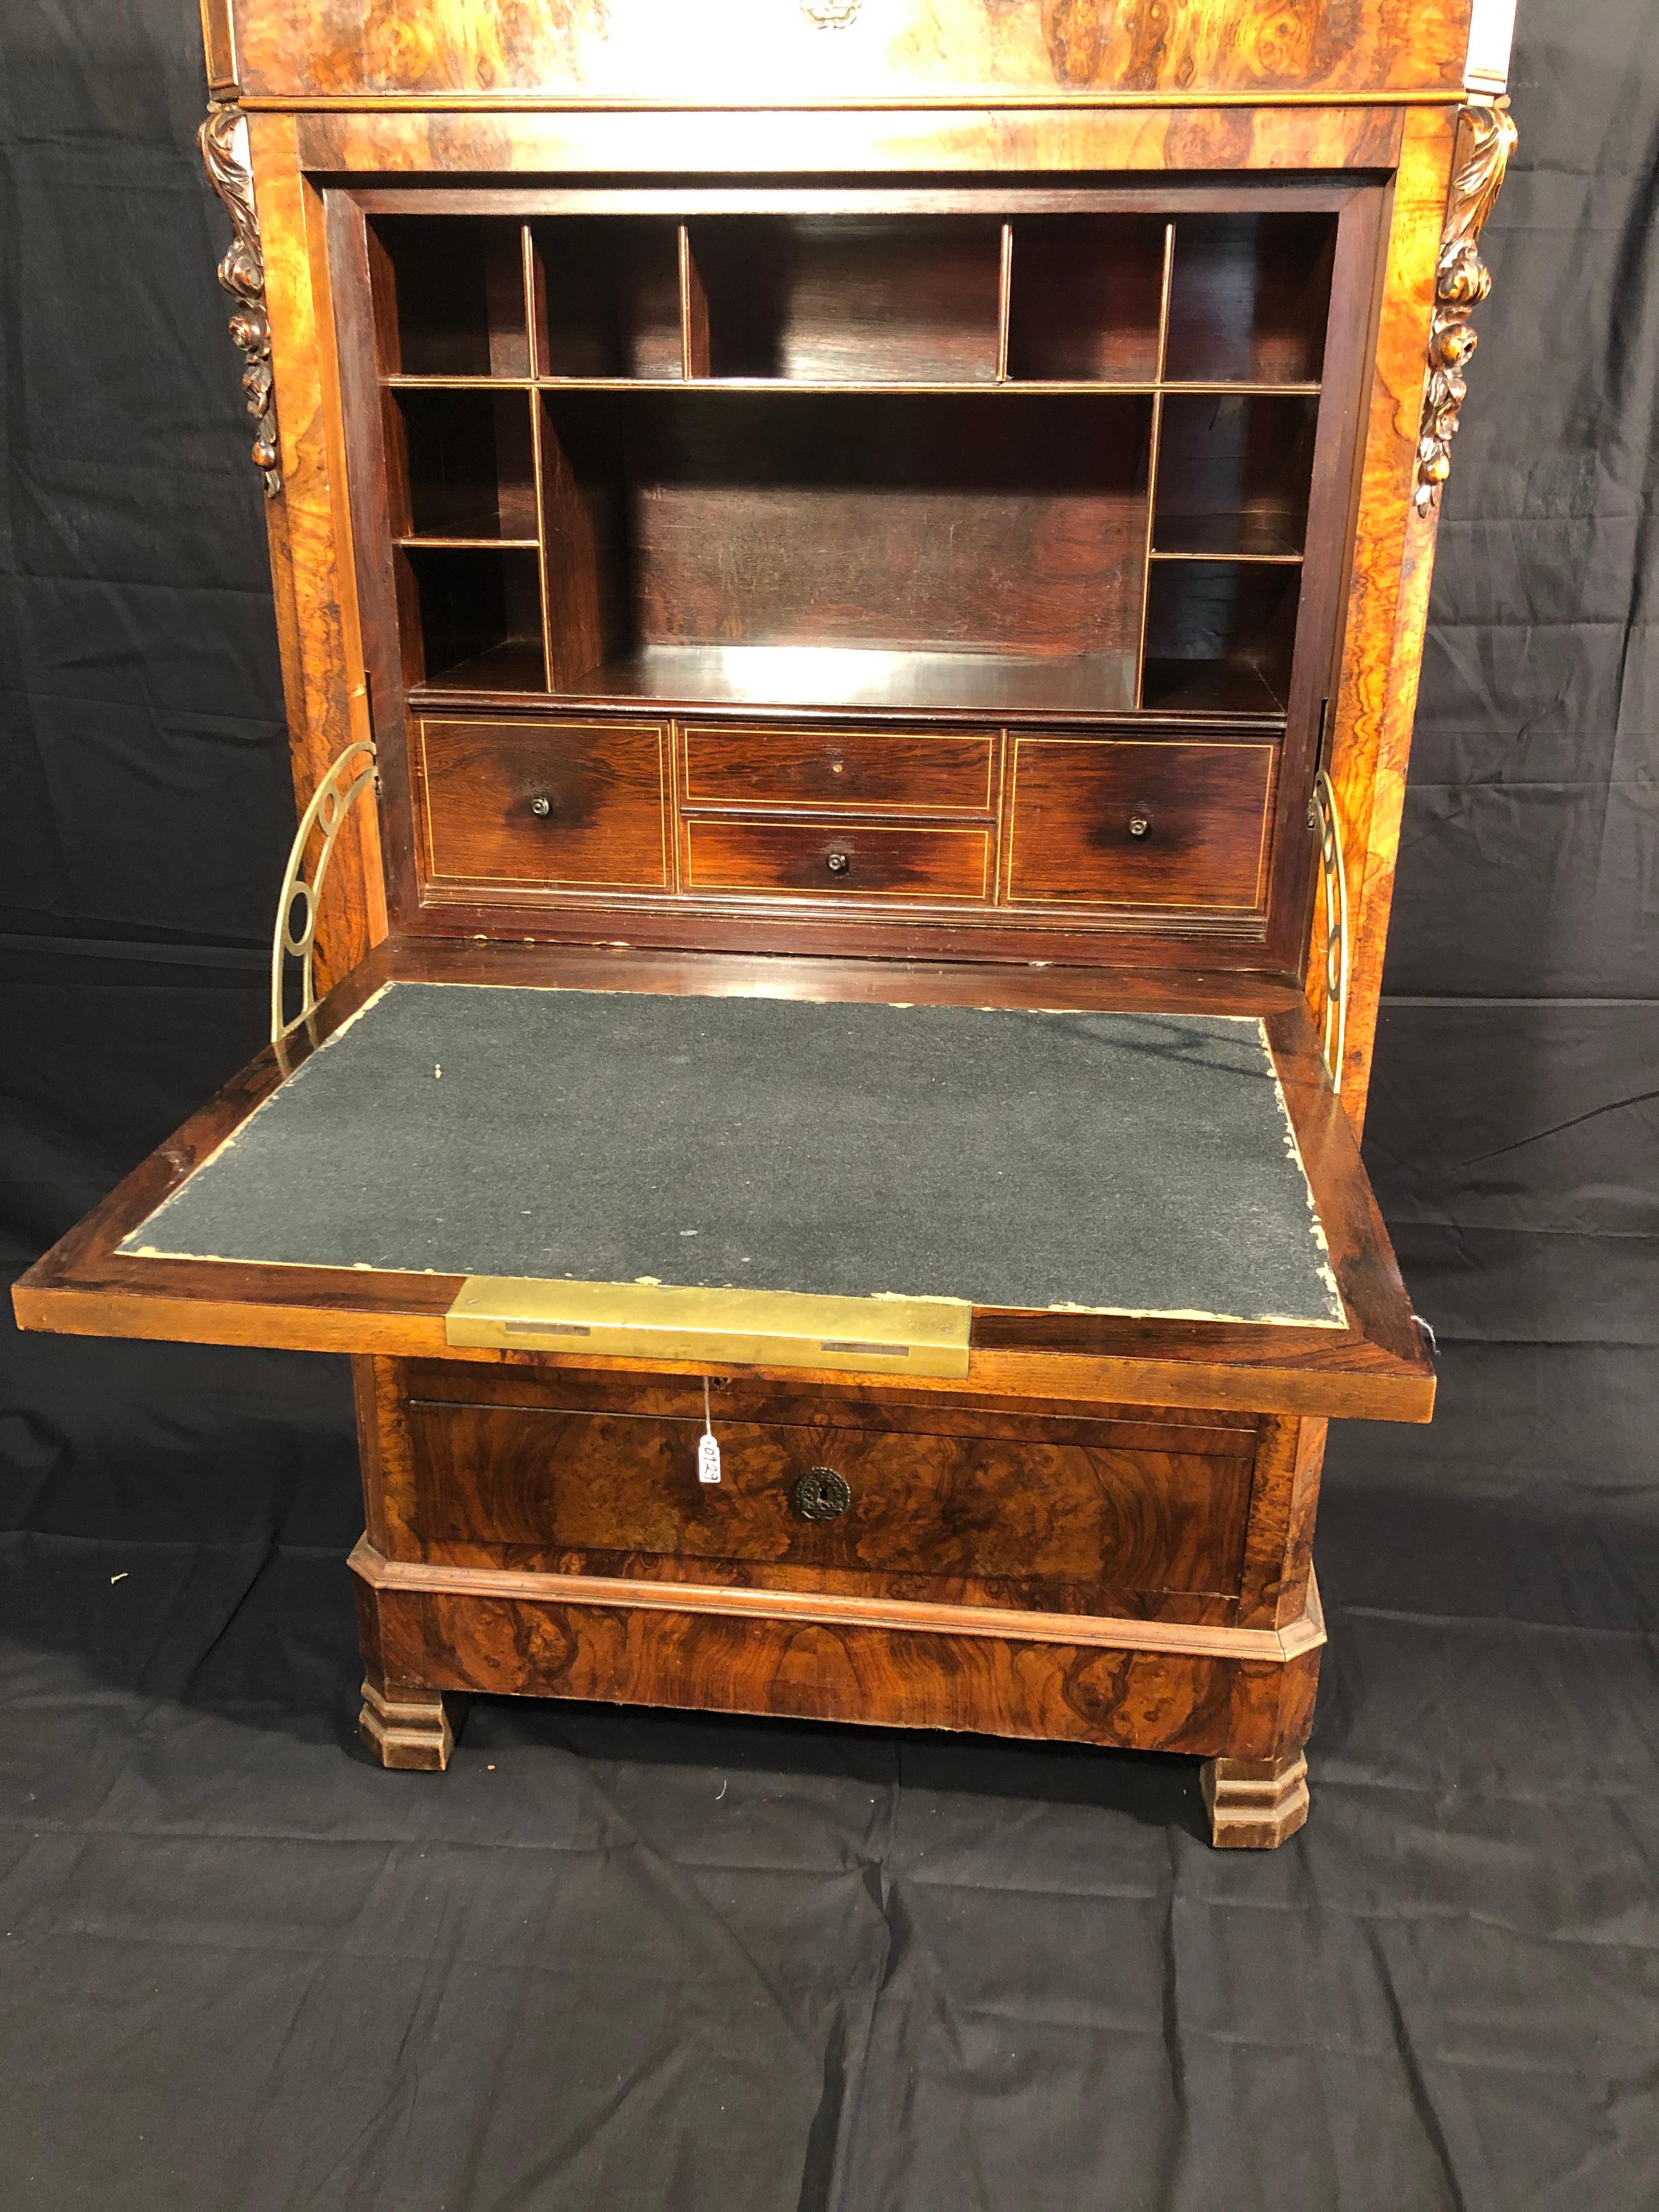 Beautiful French secretaire of the Louis-Philippe era, of excellent quality and quality of the woods, in walnut burl and rosewood interiors with inlays of fruit woods.
Contemporary marble in the cabinet, in excellent condition both outside and